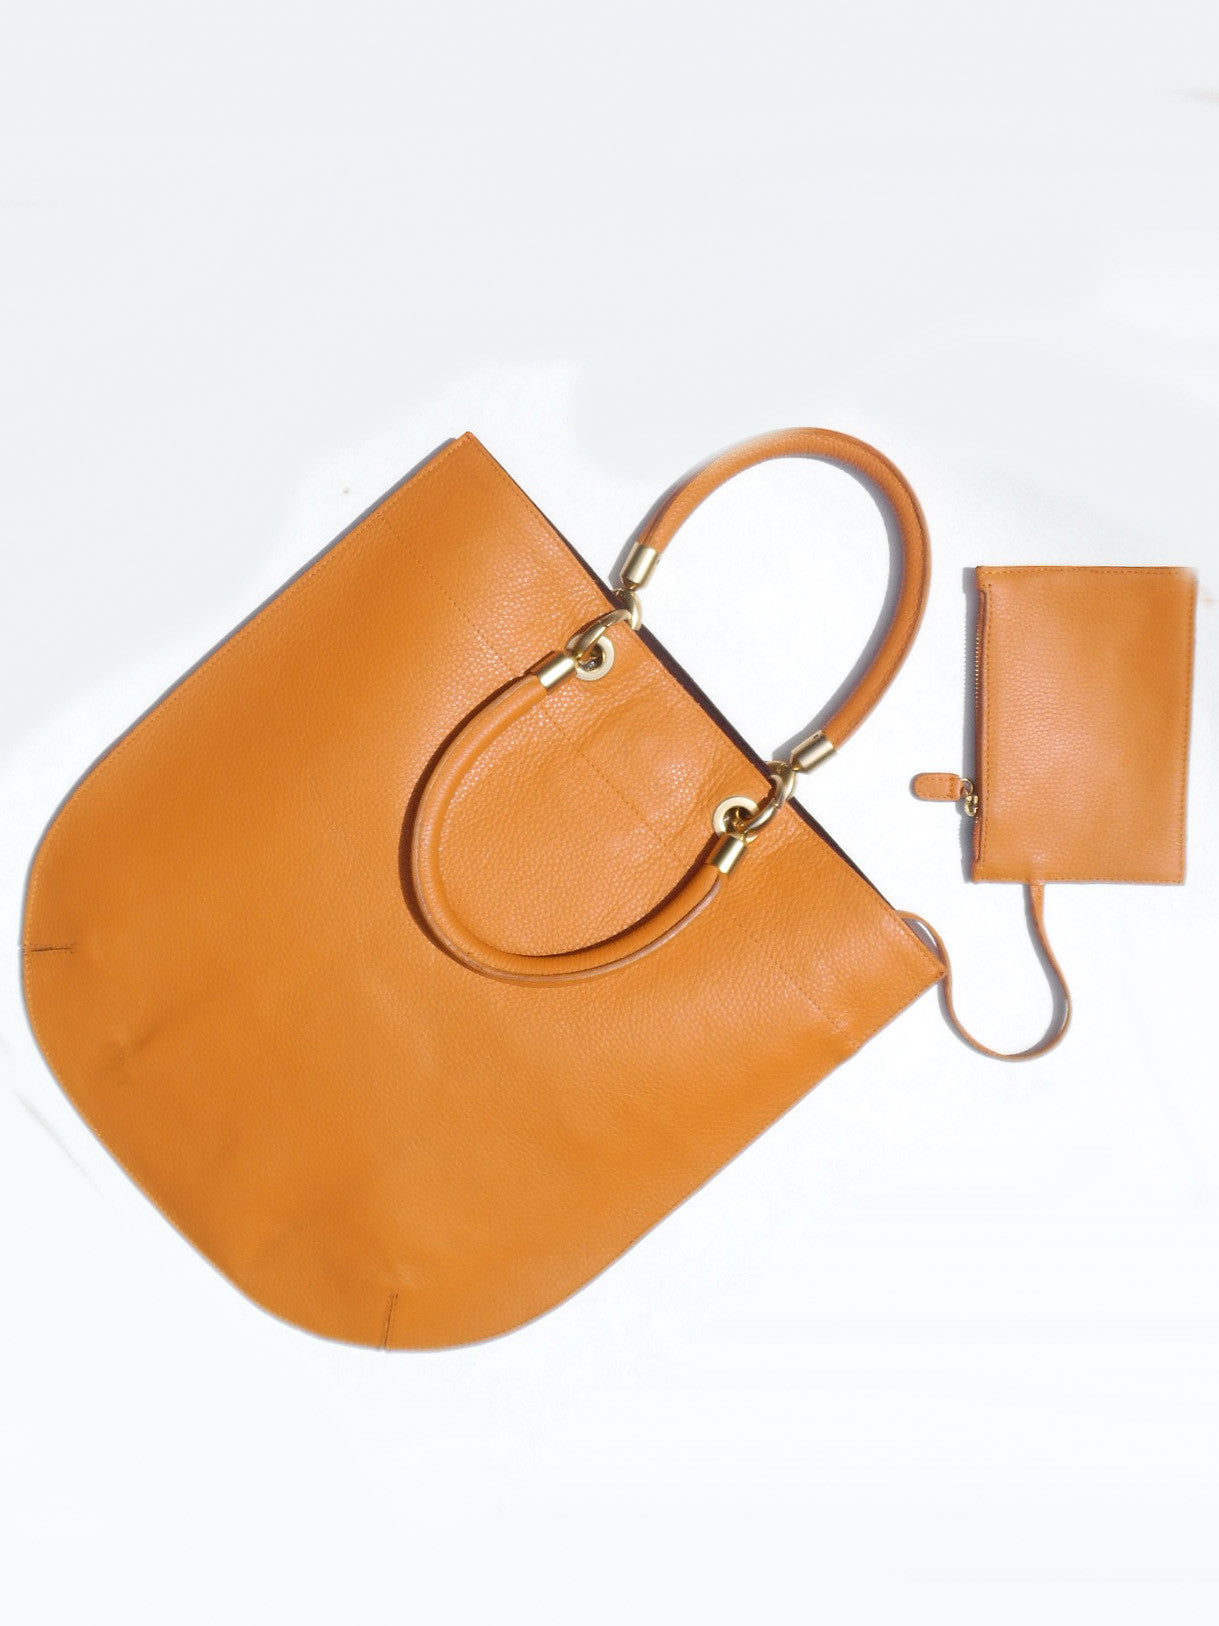 FLAT TOTE LEATHER BAG